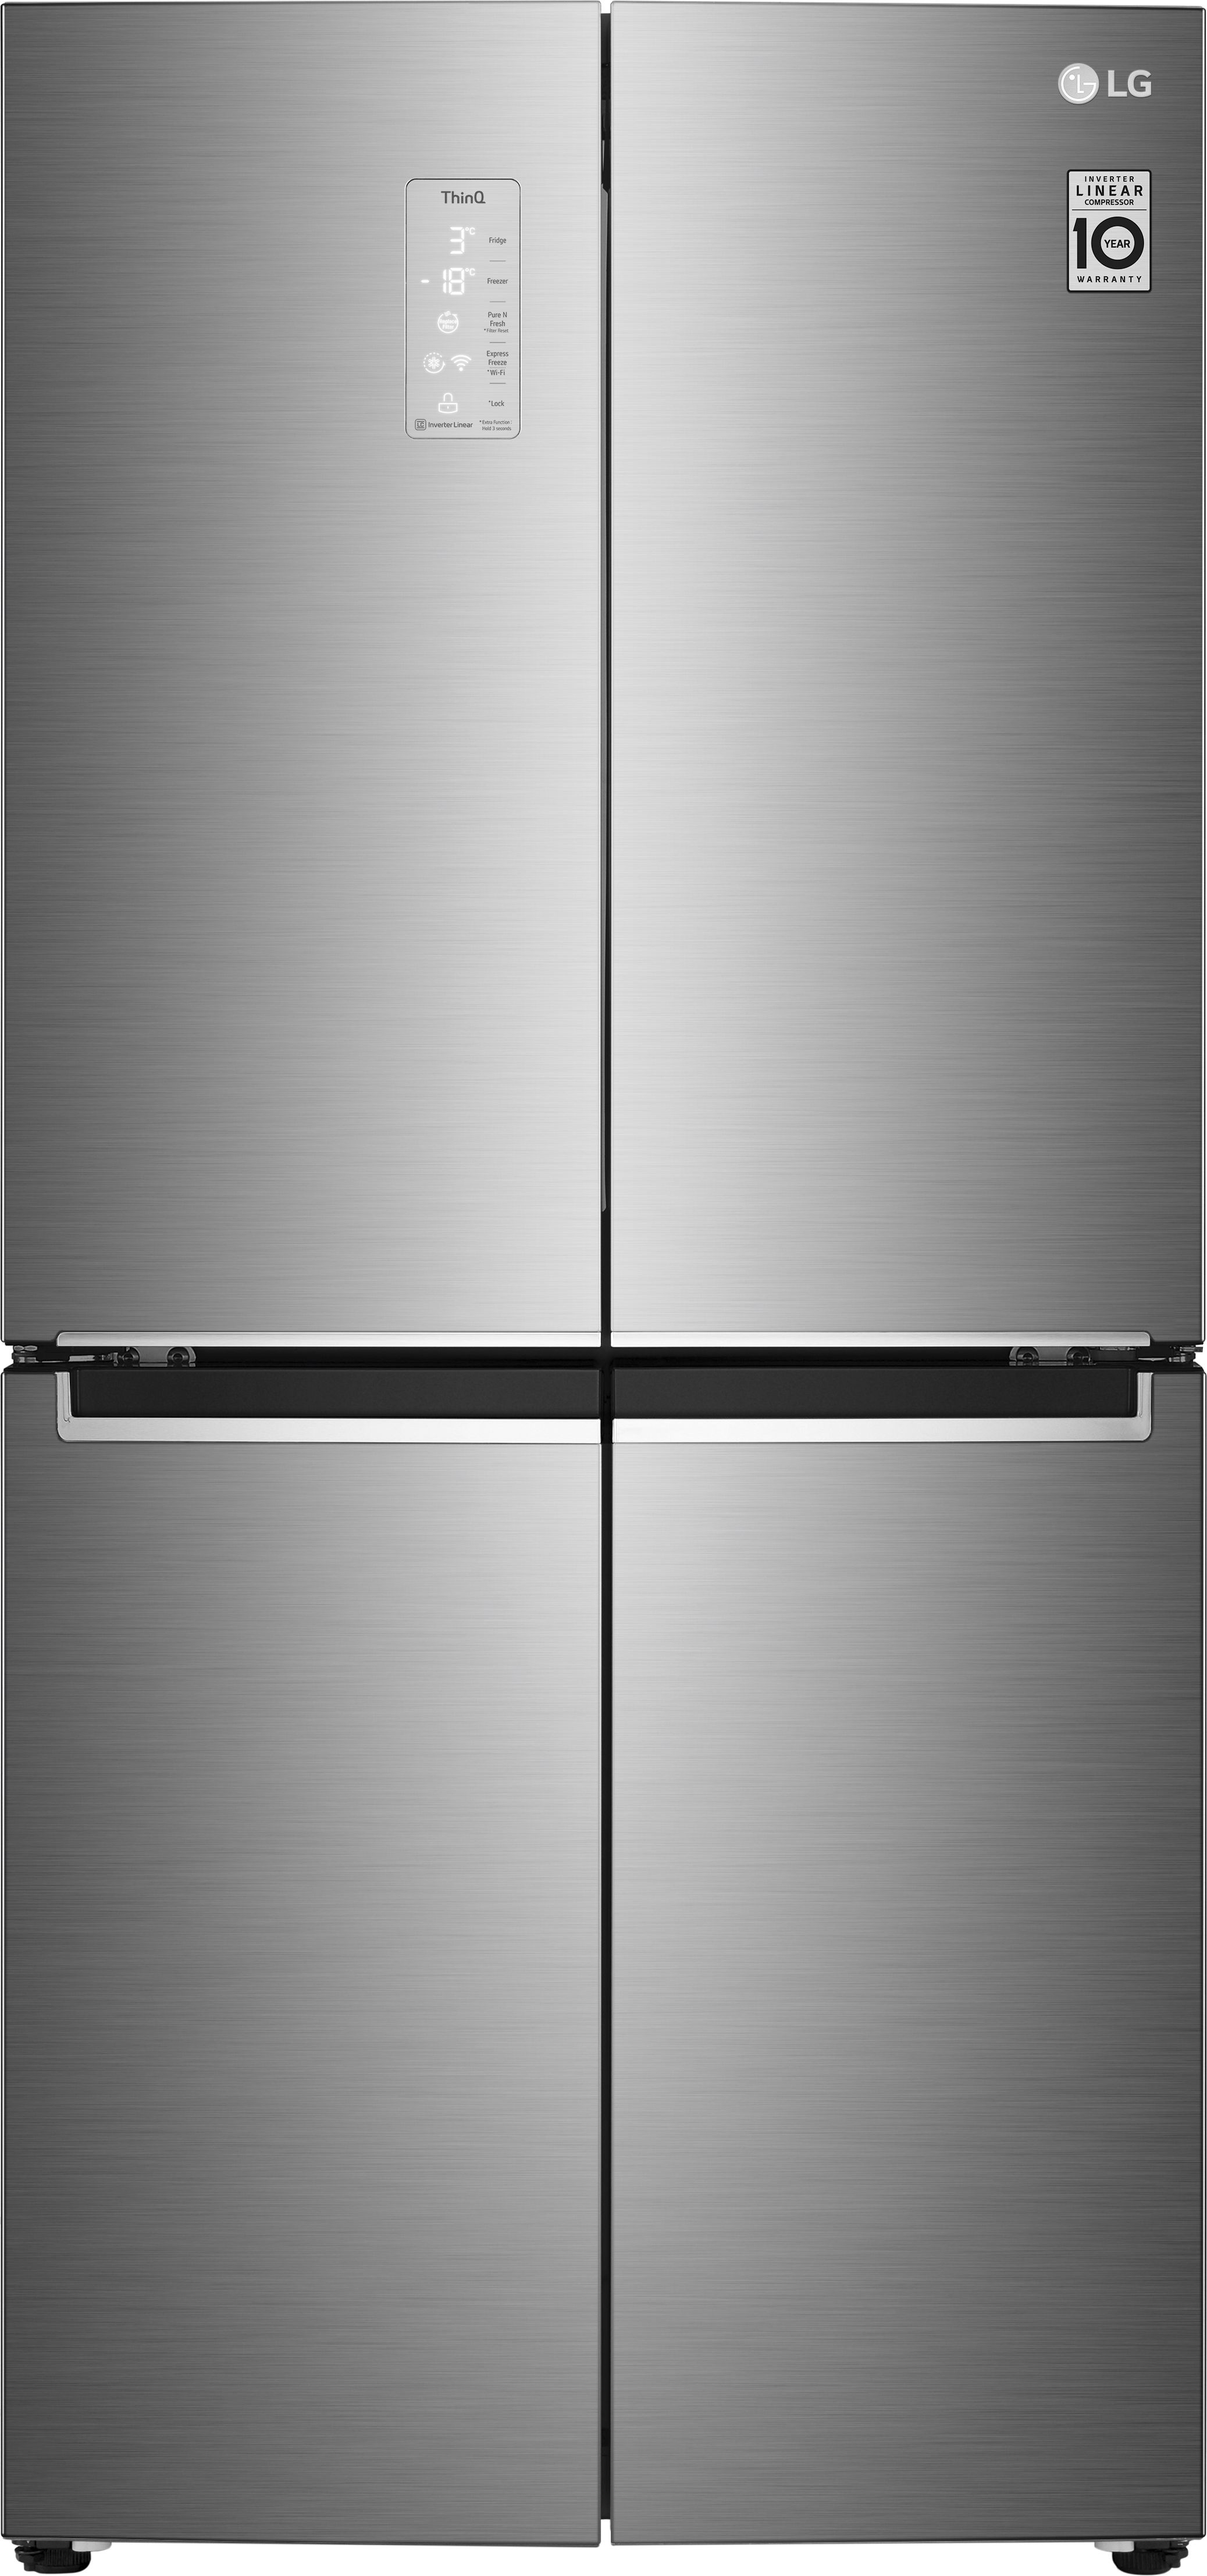 LG NatureFRESH GMB844PZ4E Wifi Connected Frost Free American Fridge Freezer - Shiny Steel - E Rated, Silver